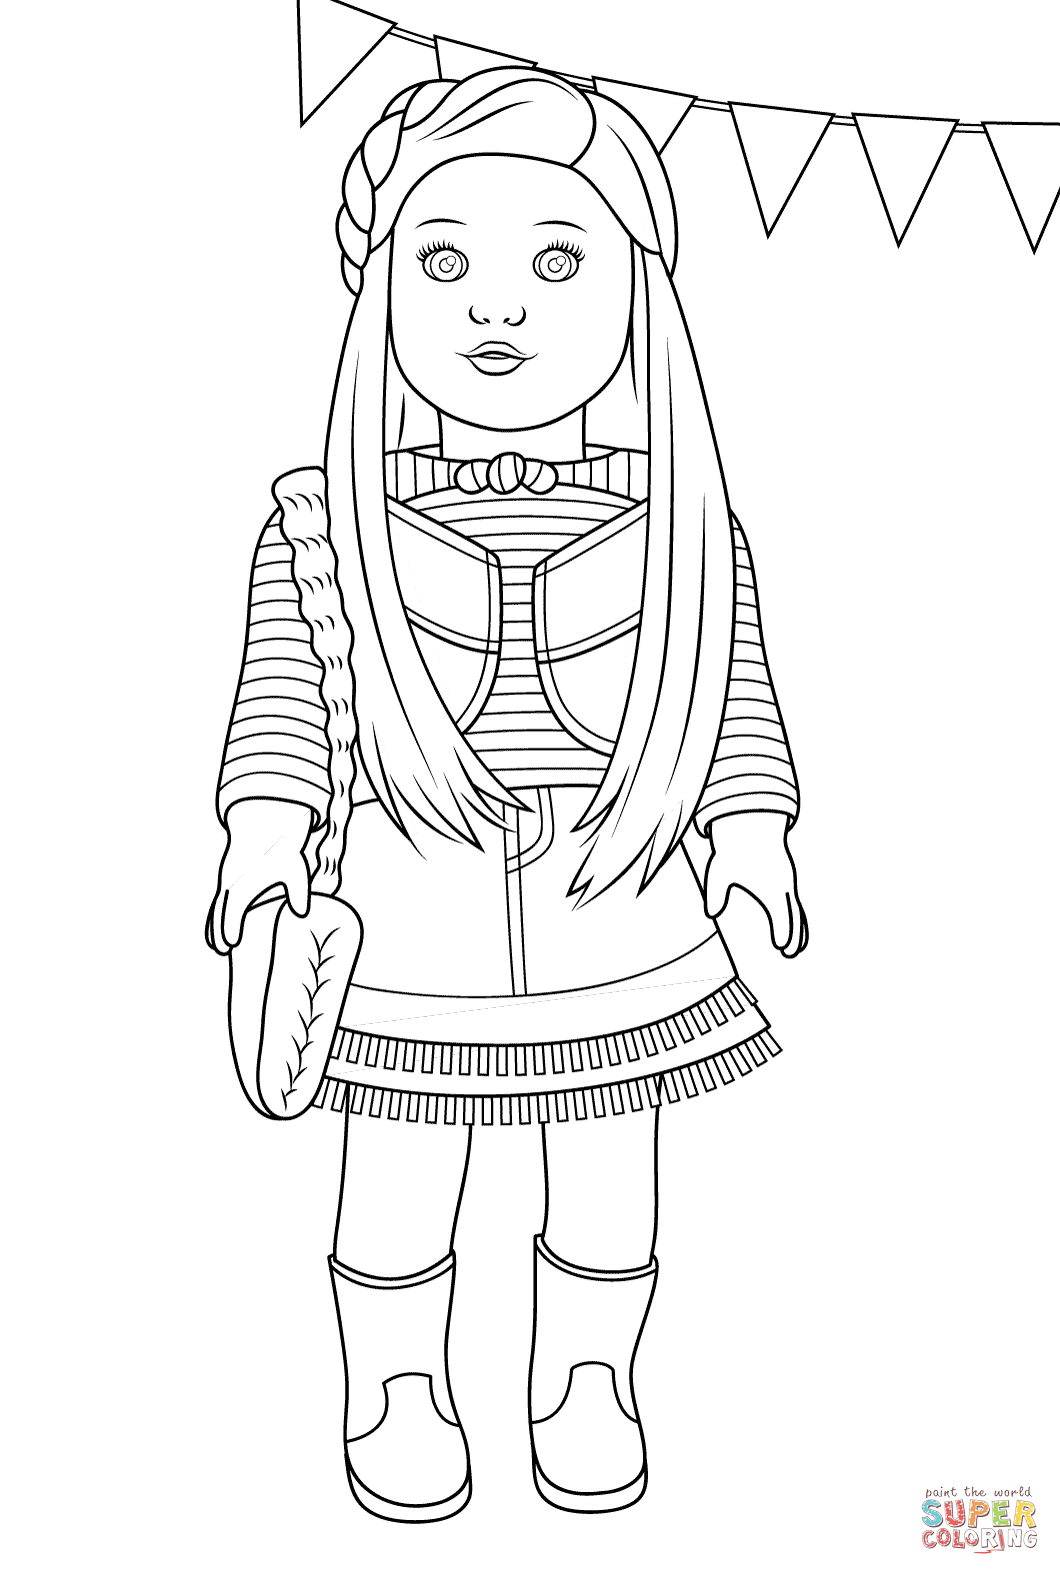 American Girl Mckenna Coloring Page | Free Printable Coloring Pages - Free Printable Coloring Pages For Girls